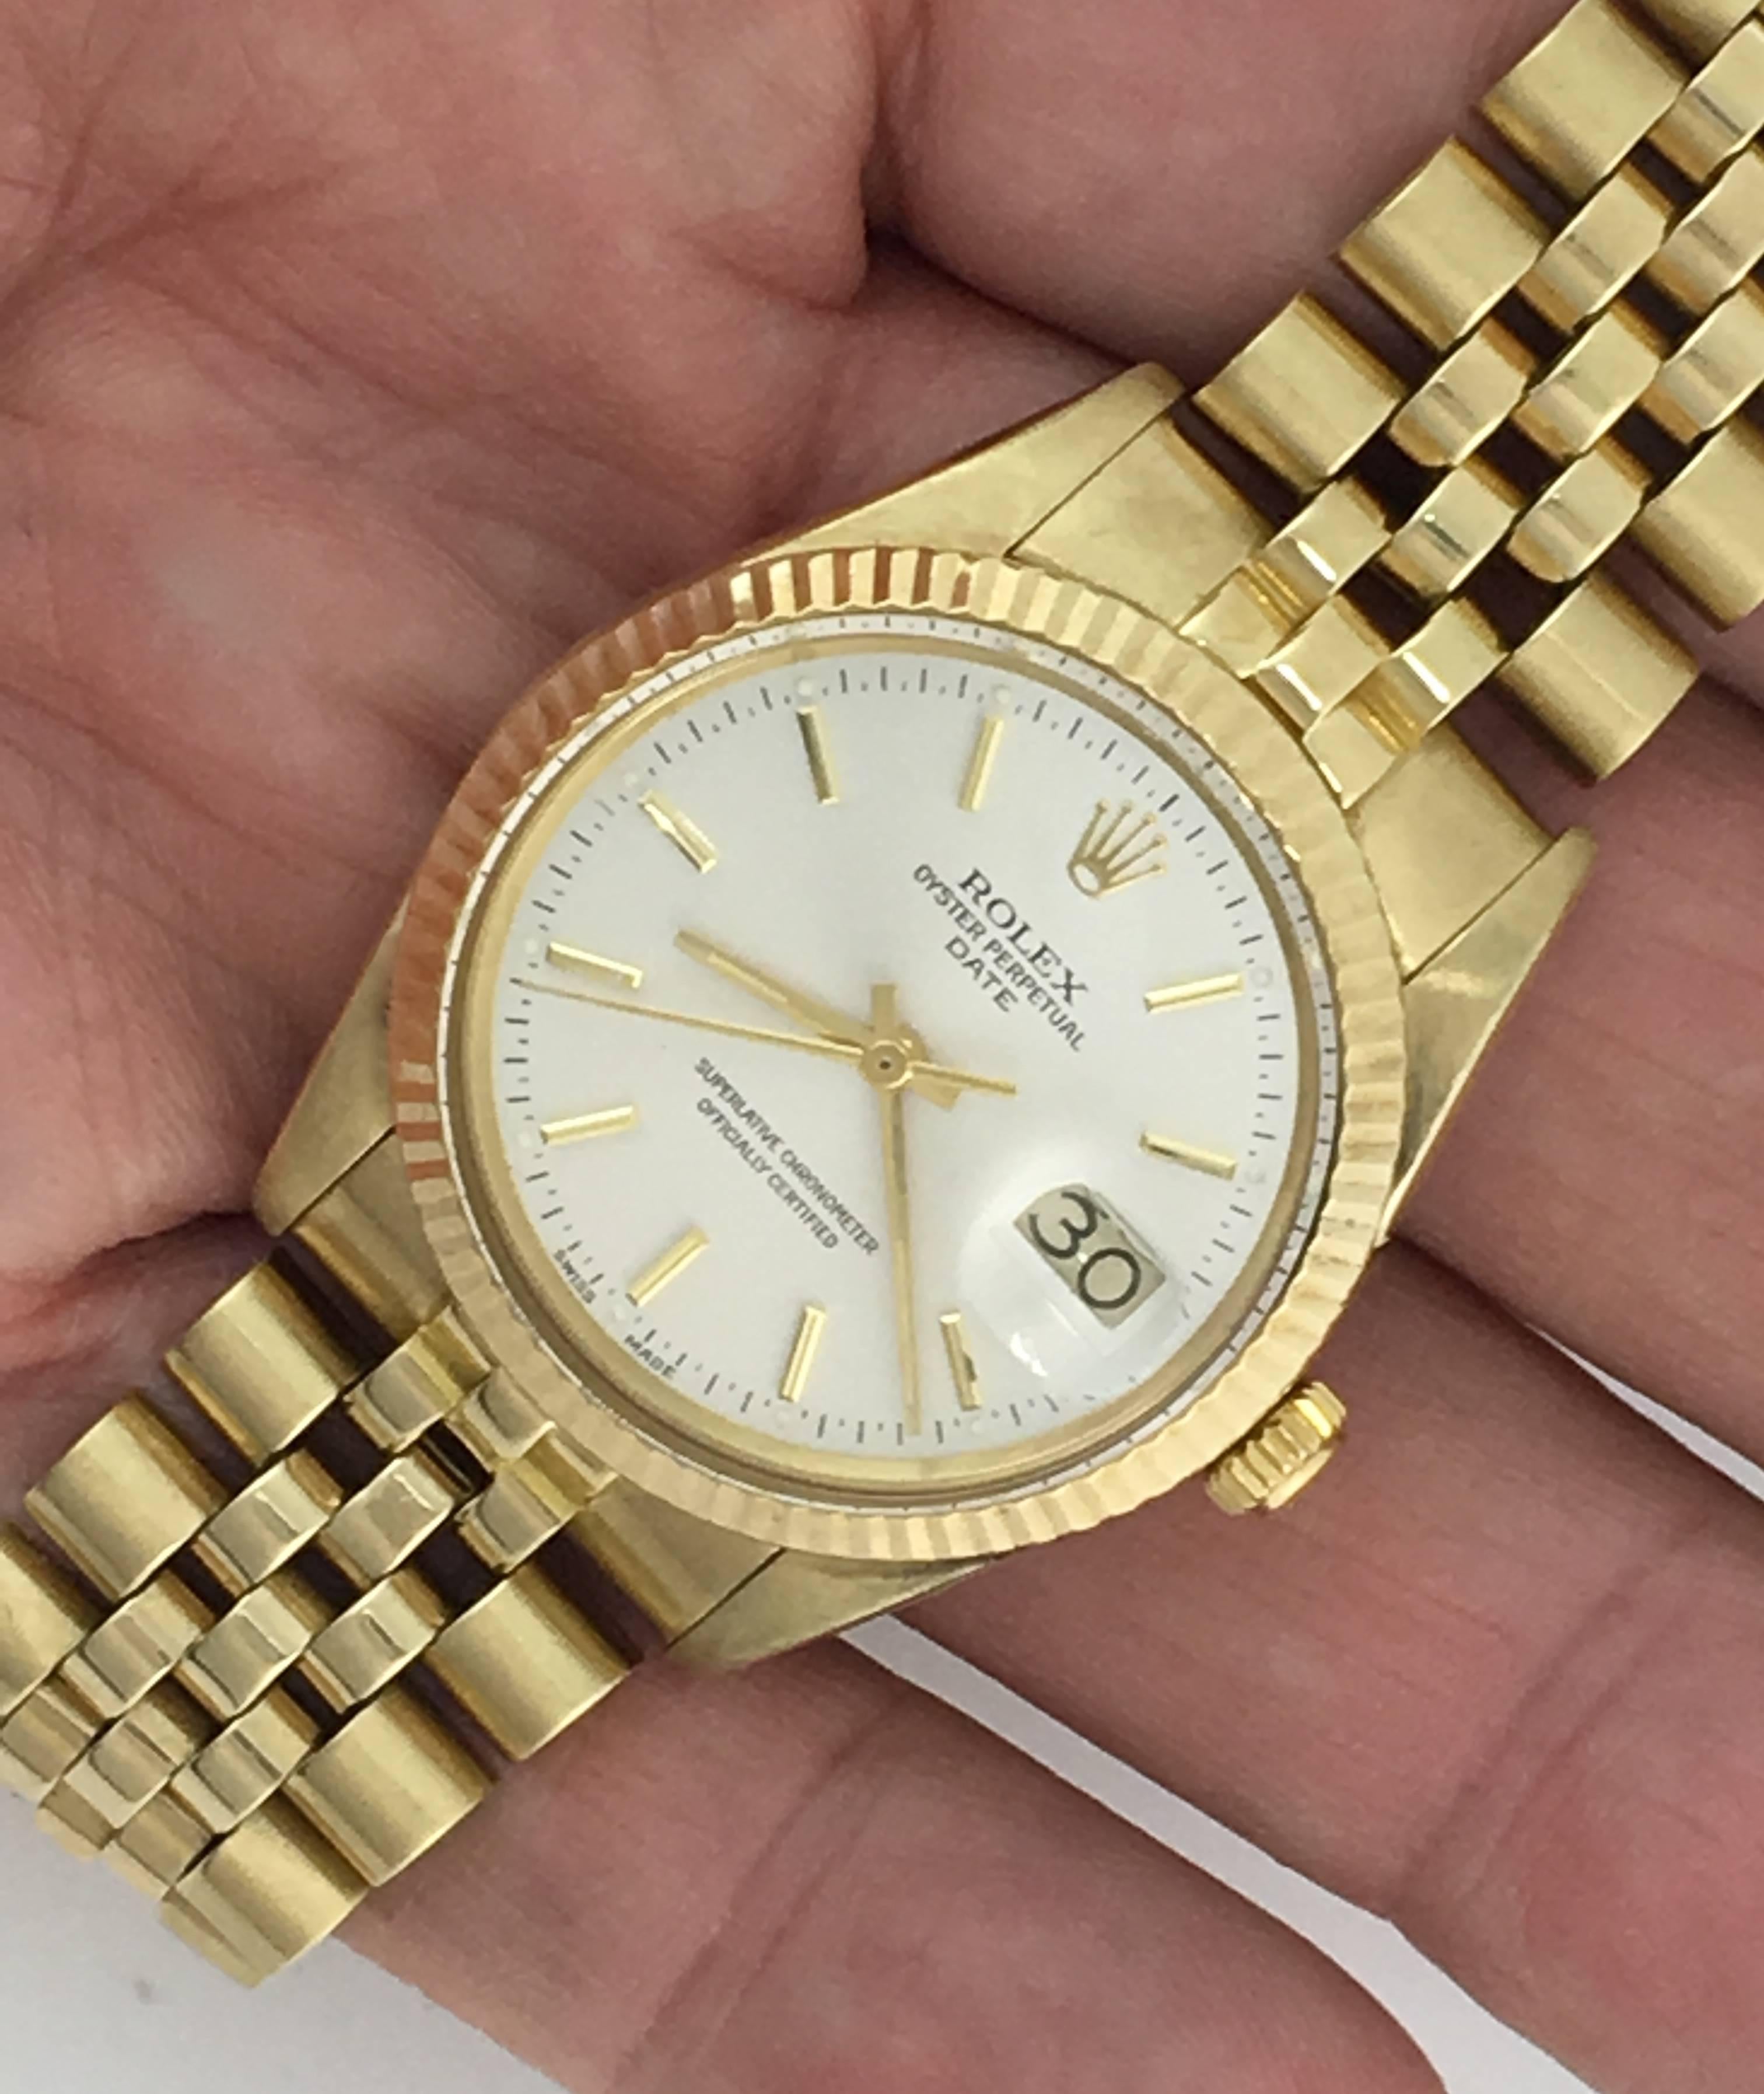 Manufacturer: Rolex
Model Name: Date
Model Number: Model 15037
Gender: Mens
Movement: Automatic Winding
Movement Details: Oyster Perpetual Date
Case: 14k Yellow Gold case with fluted bezel (34mm dia.)
Bracelet: 14k Yellow Gold Jubilee bracelet
Dial: